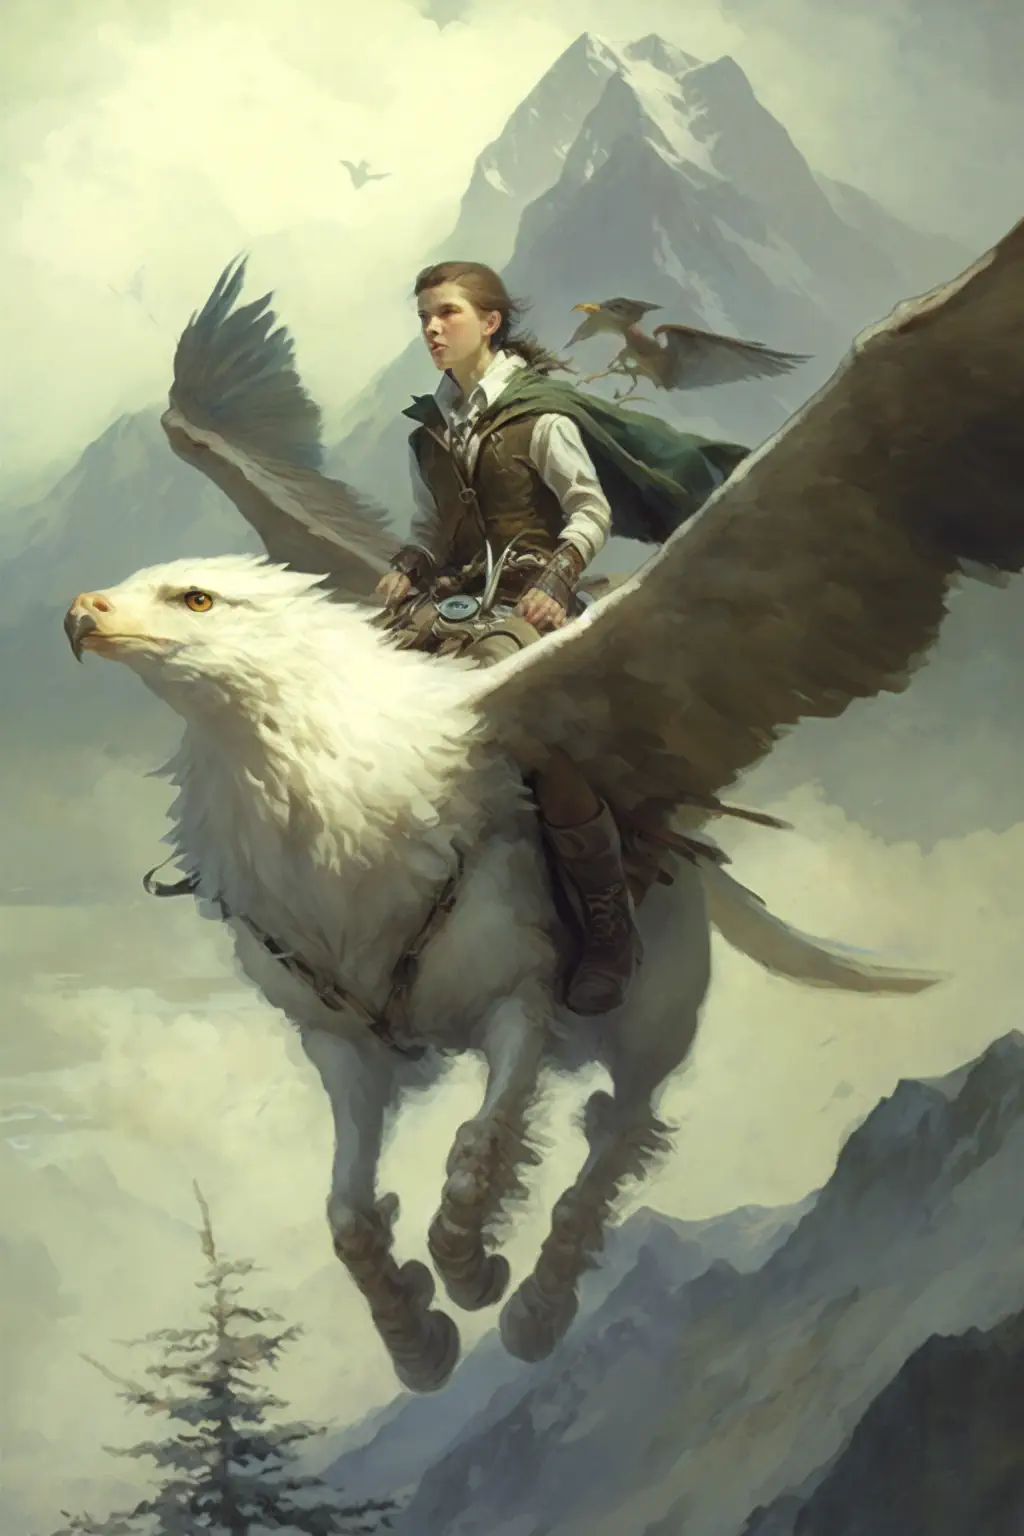 Drac0n0_young_Tolkien_elf_rides_white_Manves_Eagle_to_the_horiz_2317da32-ef00-4e35-8b9f-735551ee9fe4